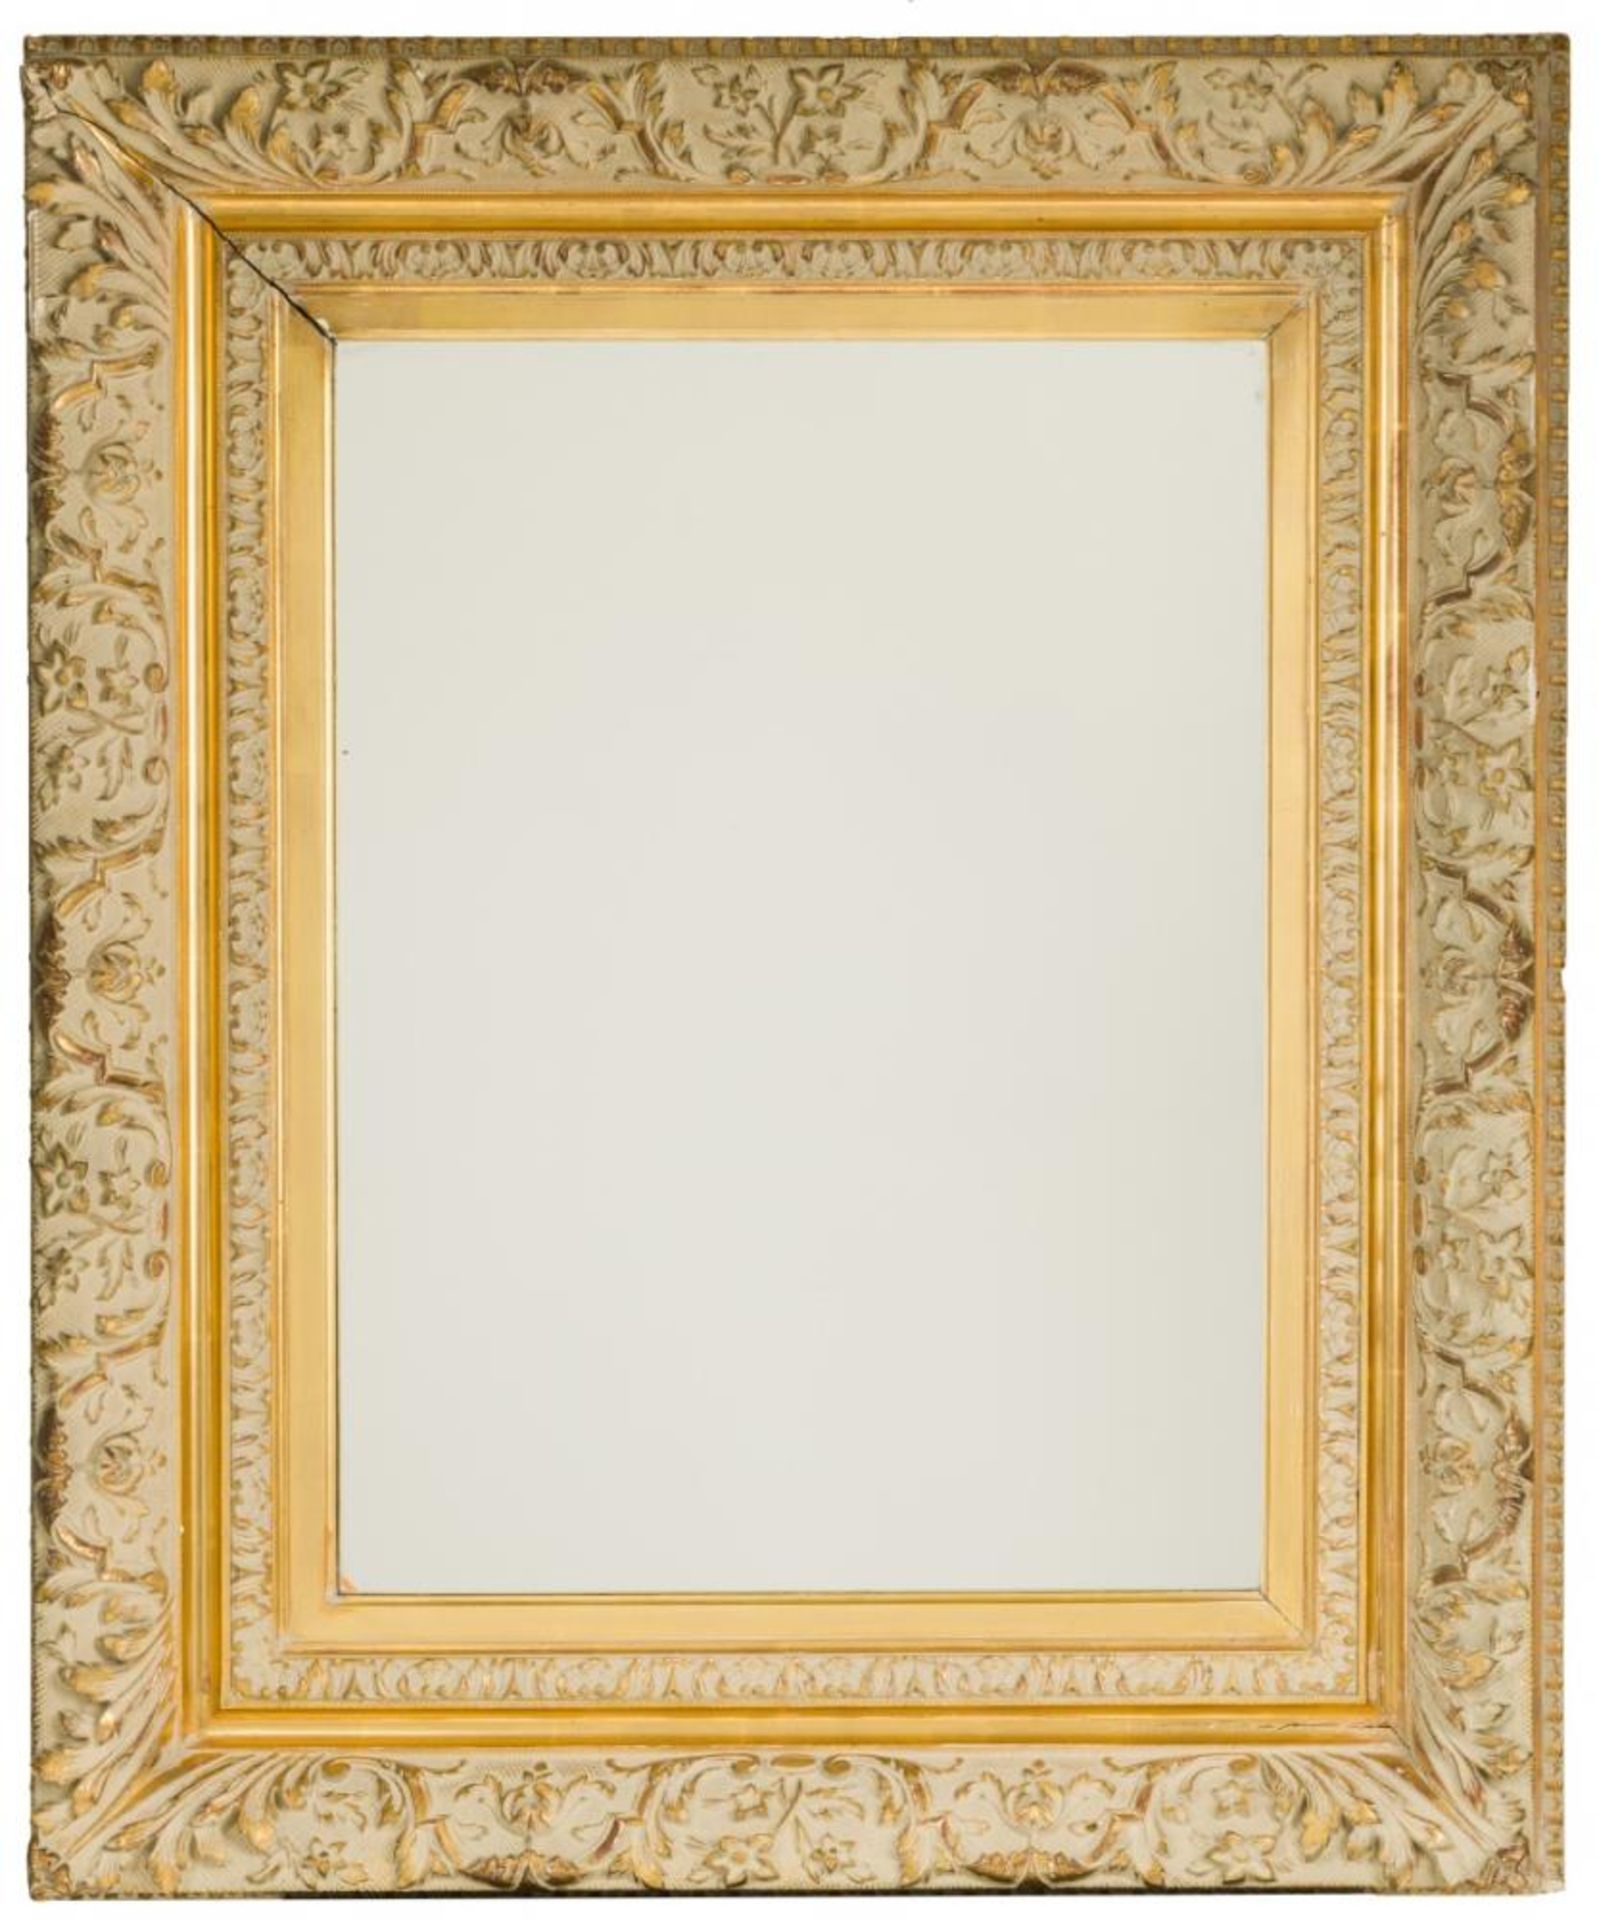 A rectangular gold painted mirror frame, 20th century.